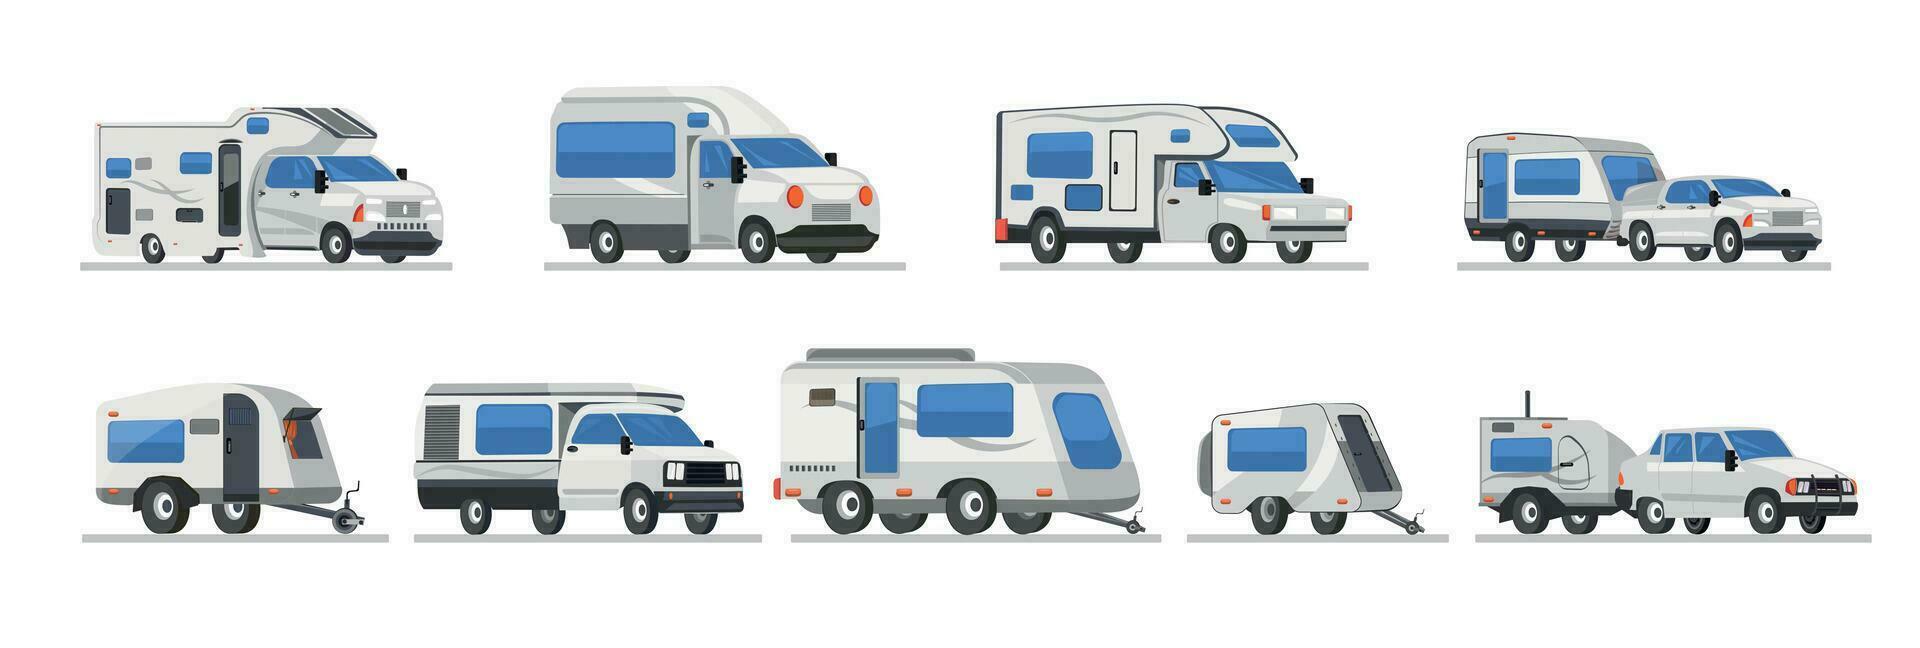 Mobile Auto Vehicles For Travel Flat Set vector